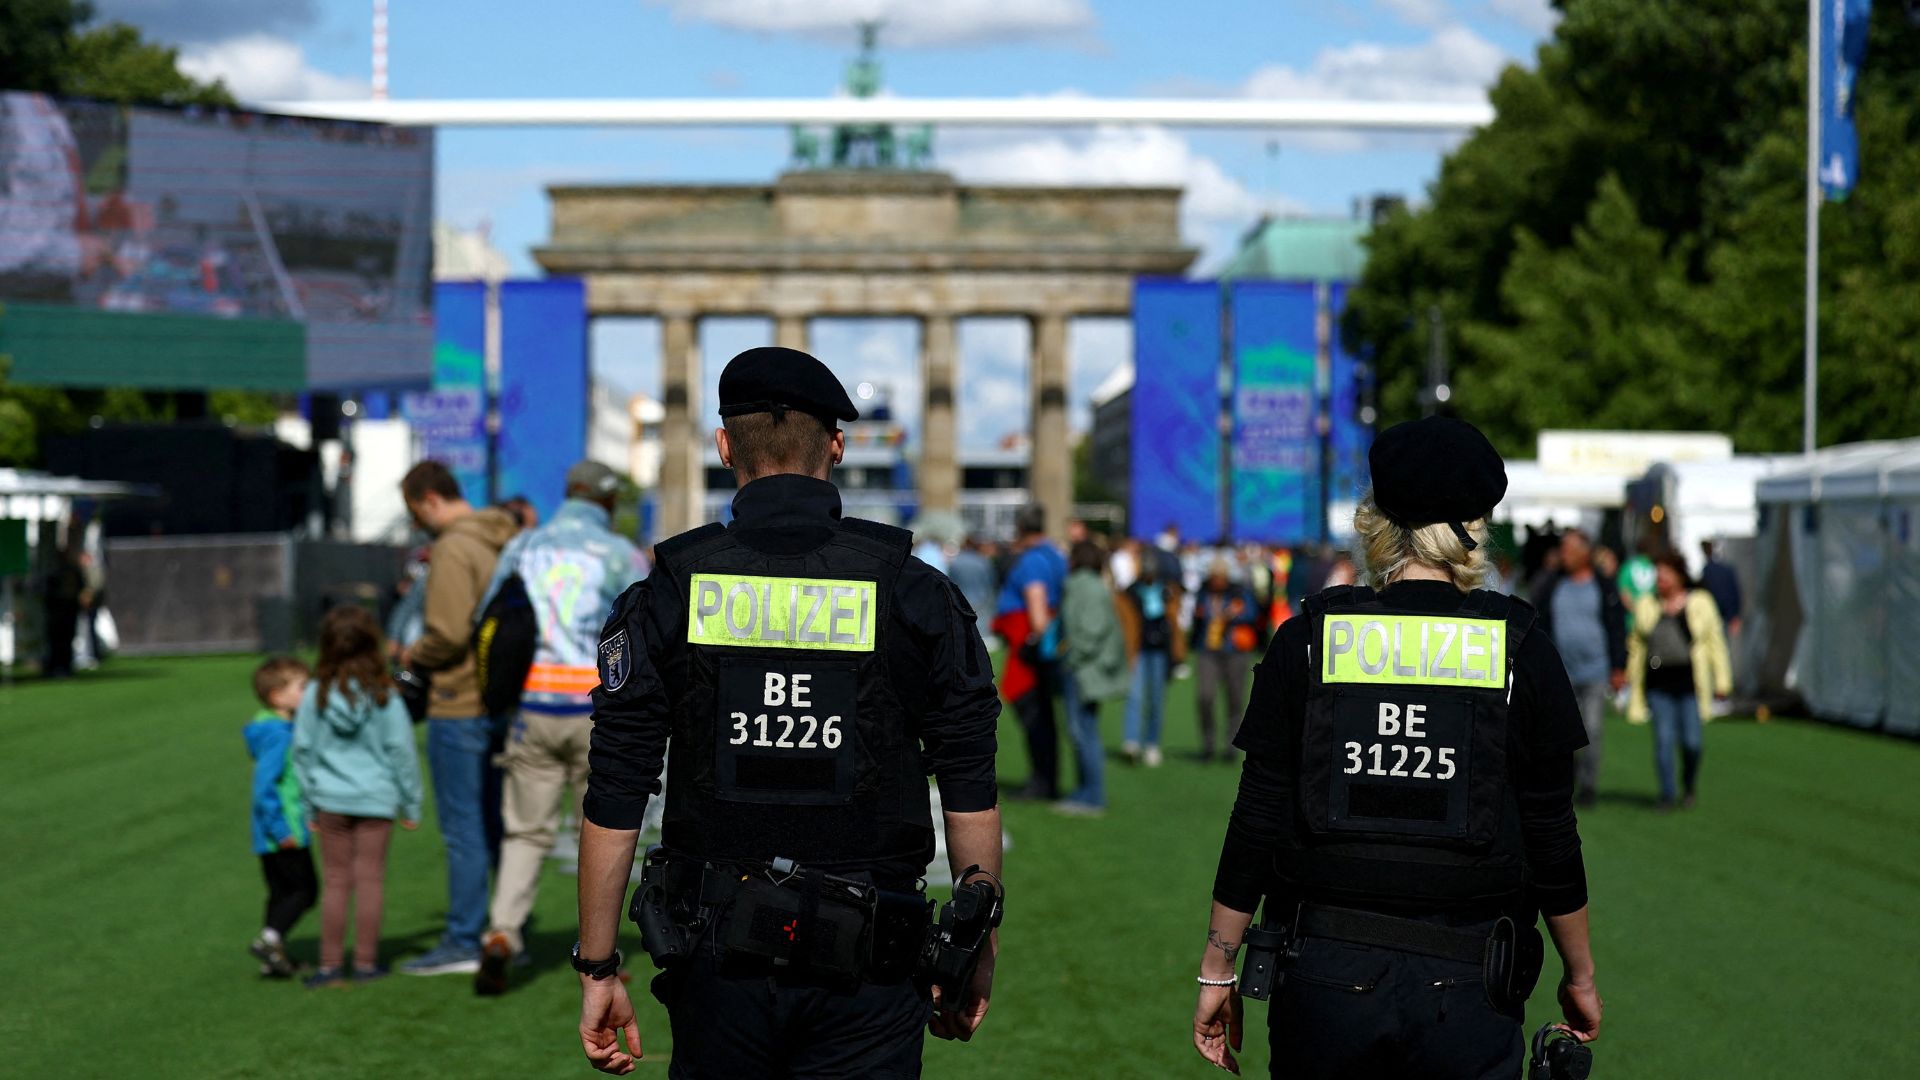 Germany welcomed police officers from across Europe on Thursday to bolster its defences against potential threats at the Euro 2024./Lisi Niesner/Reuters